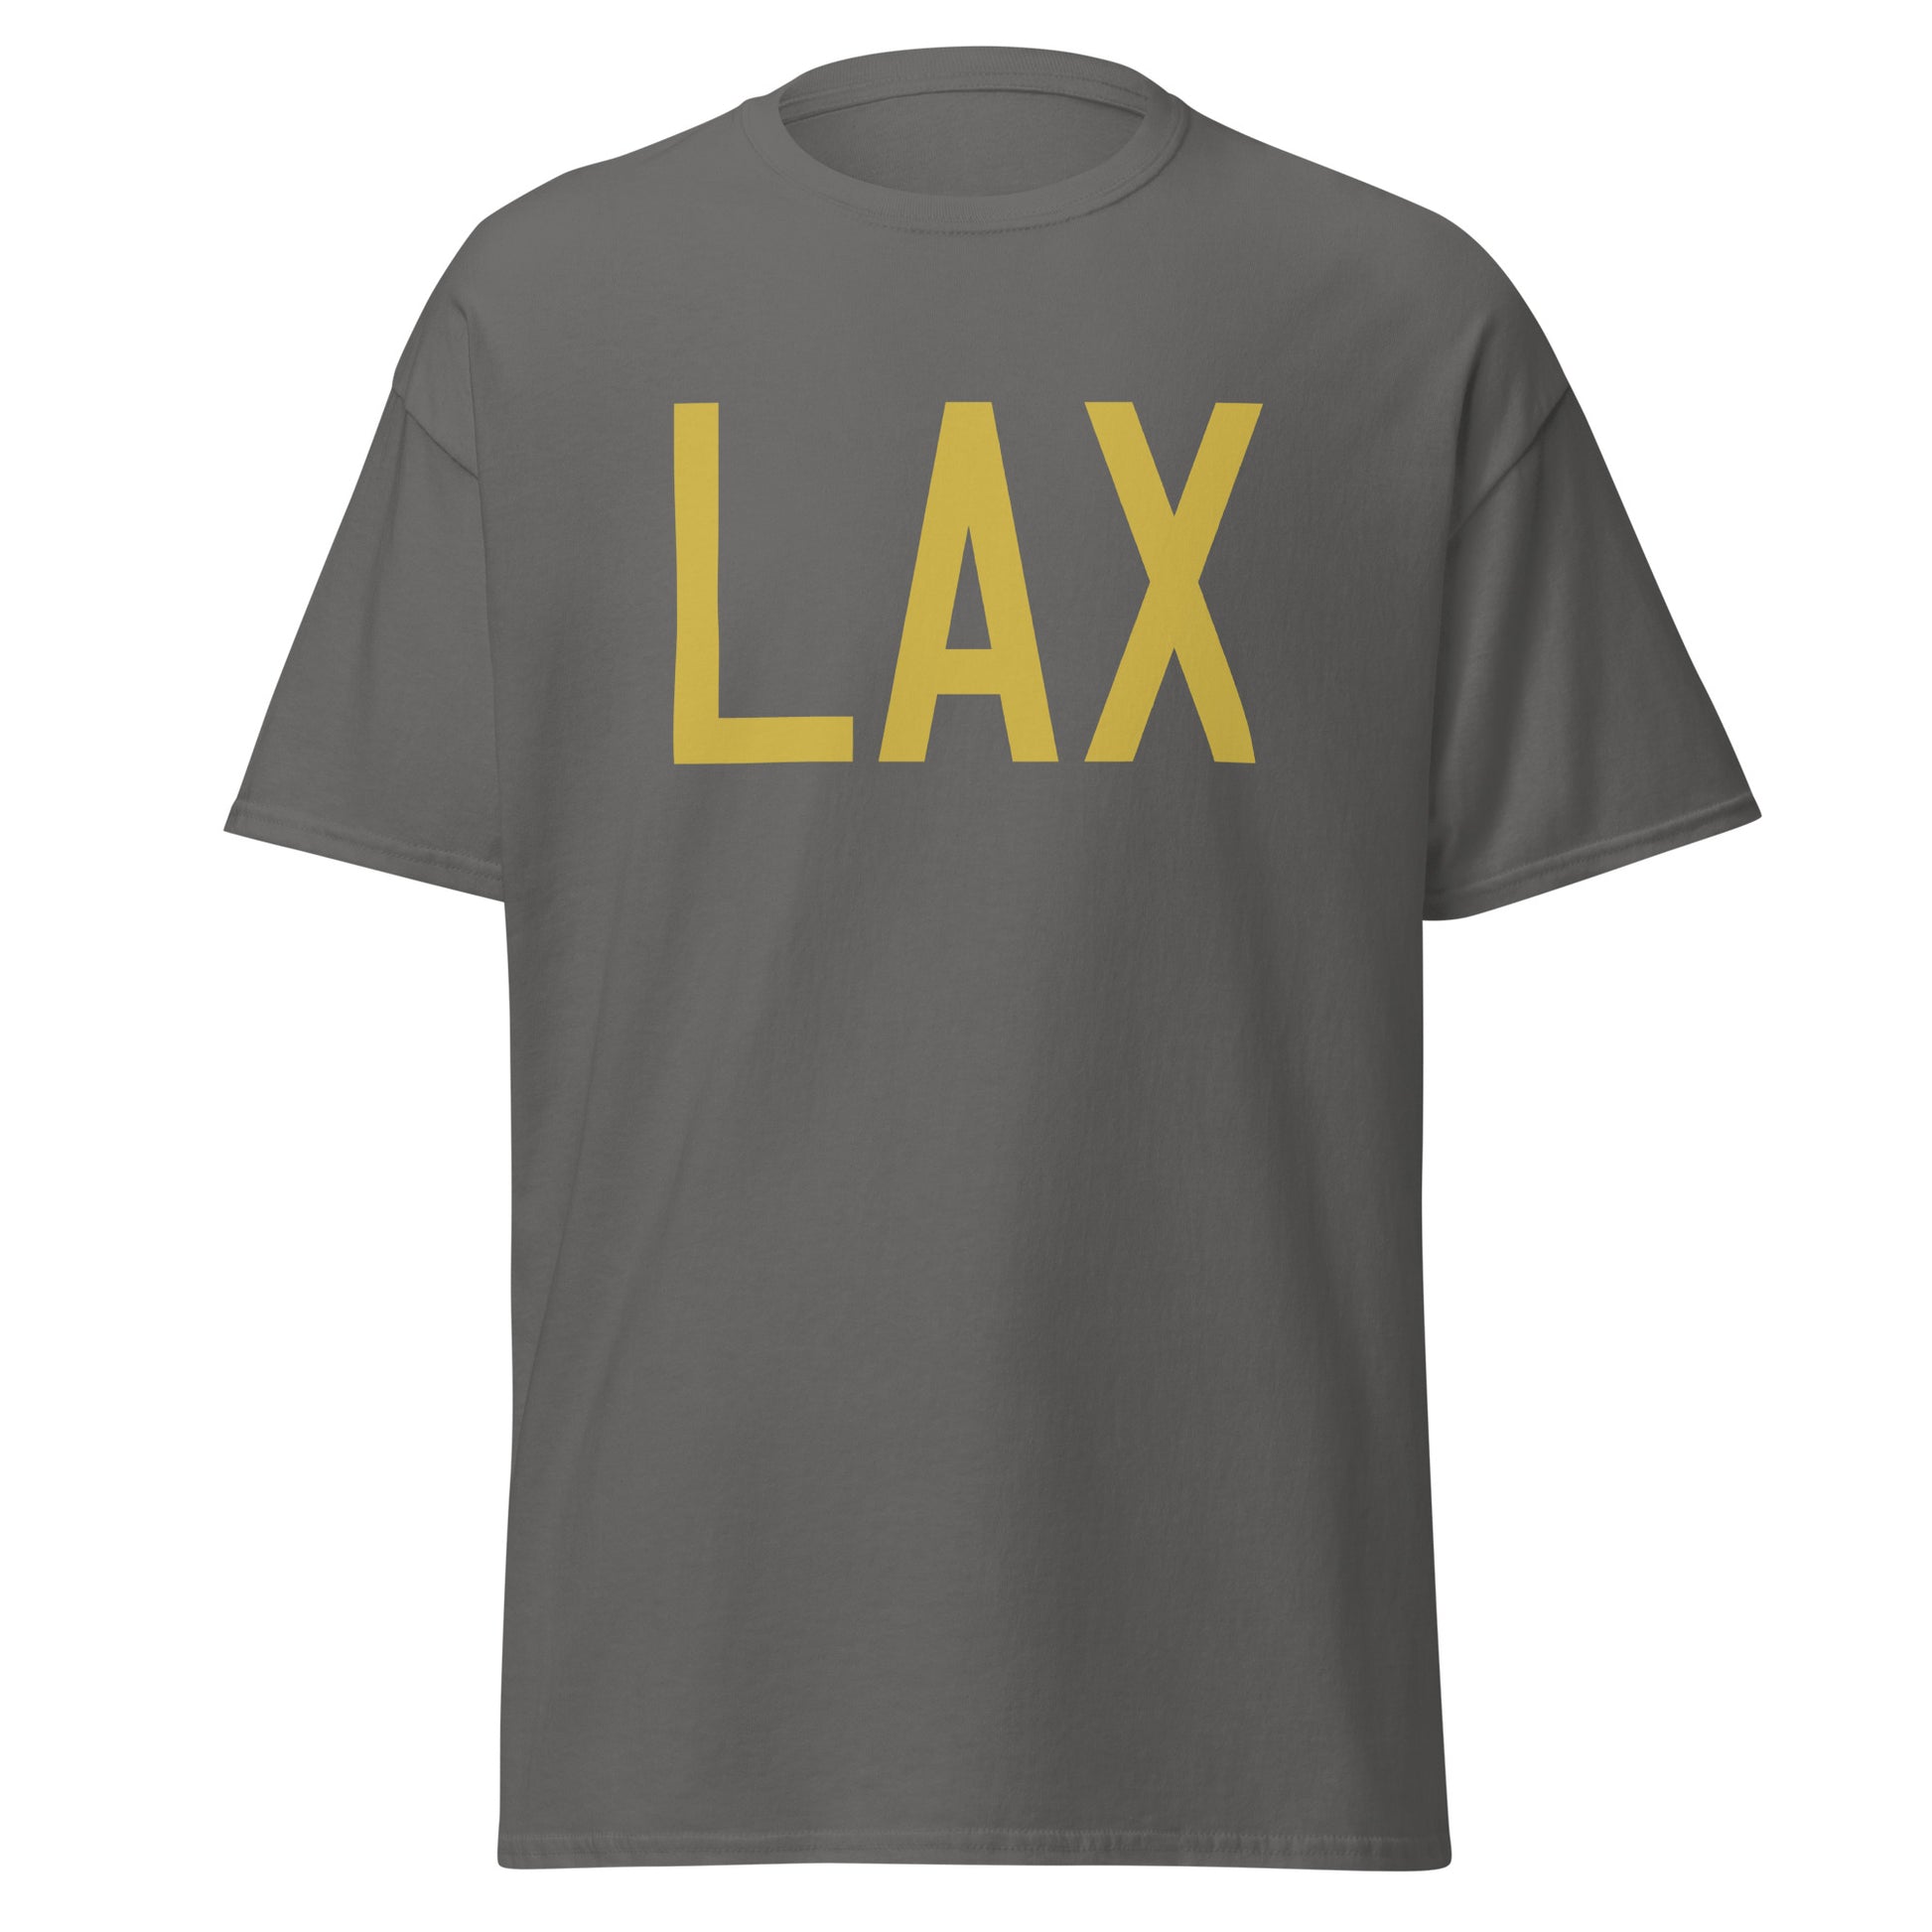 Aviation Enthusiast Men's Tee - Old Gold Graphic • LAX Los Angeles • YHM Designs - Image 05